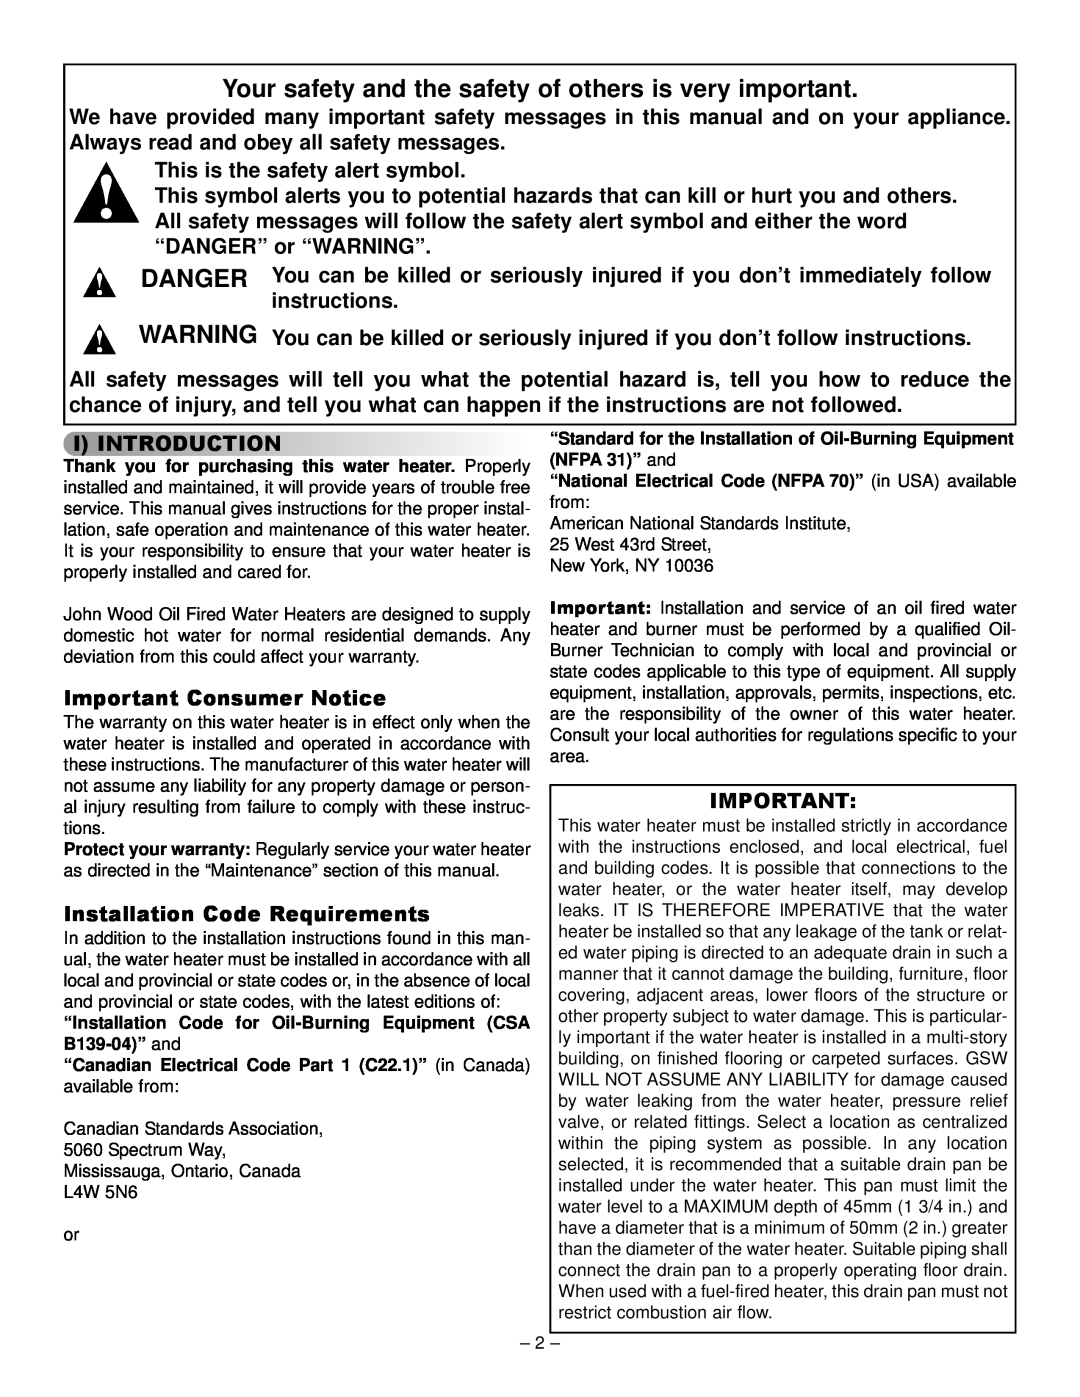 GSW JW517, JW727 JWF657, JW717 This is the safety alert symbol, Important Consumer Notice, Installation Code Requirements 